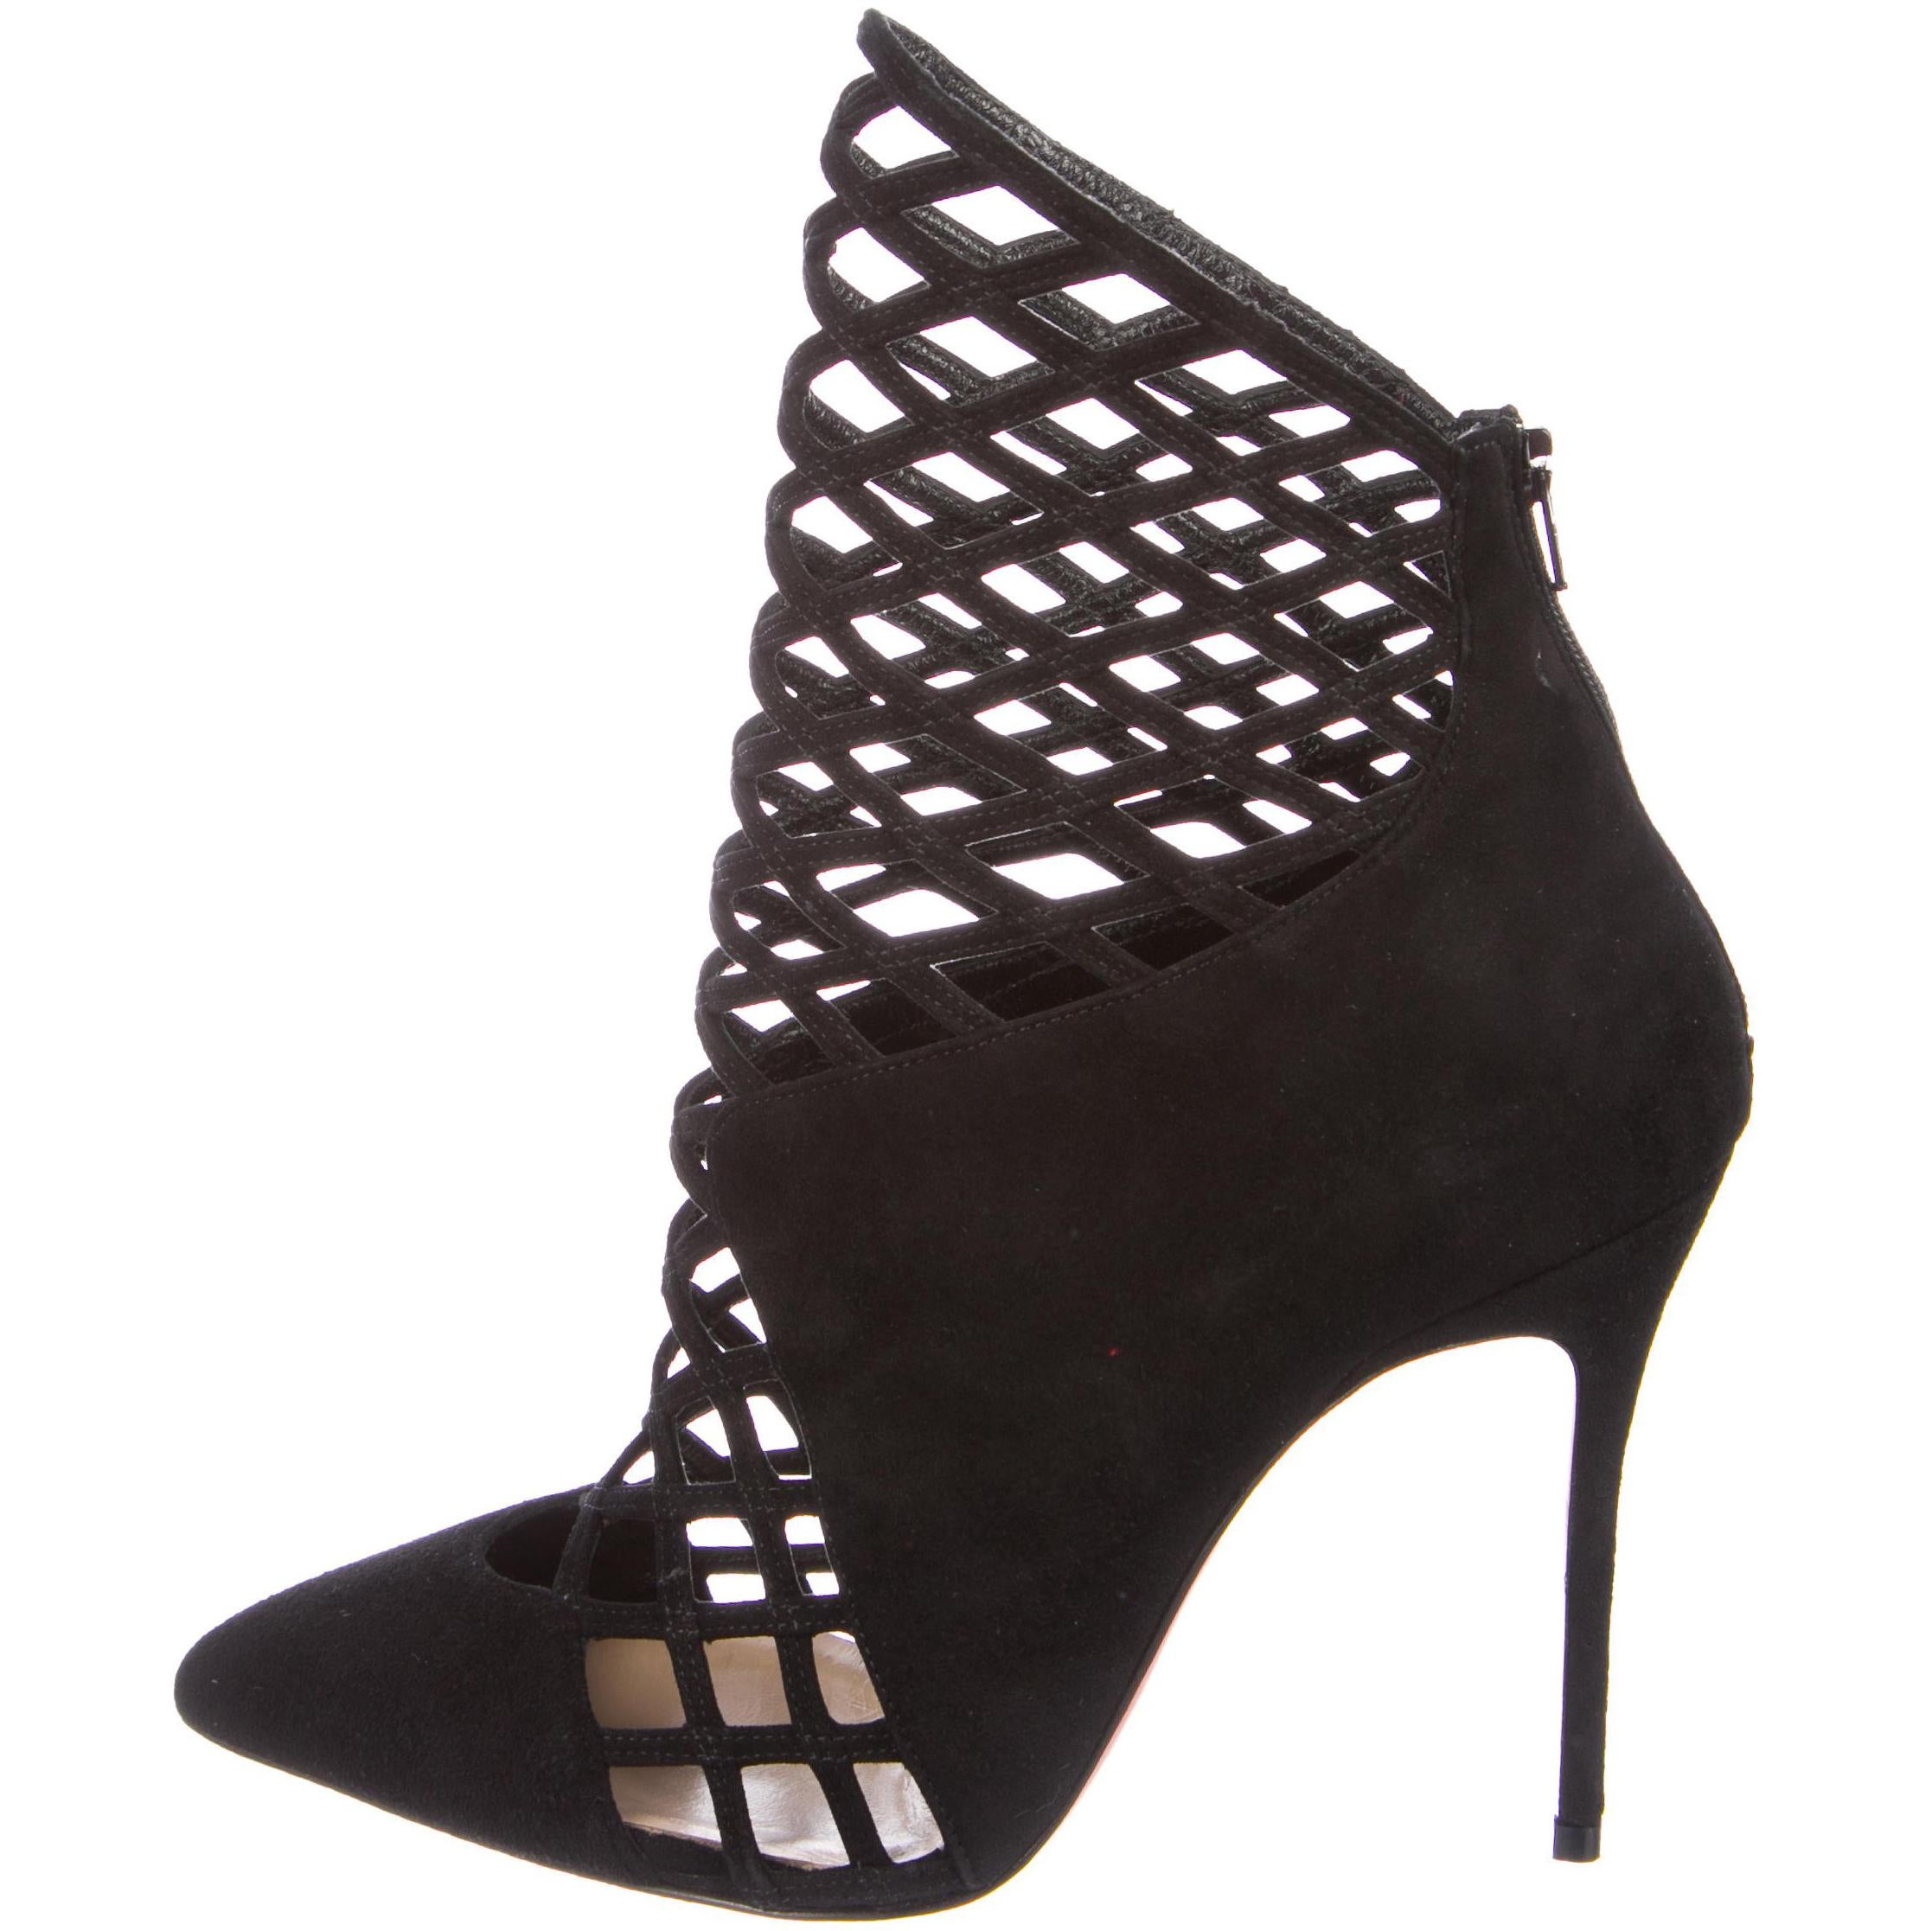 Christian Louboutin NEW Black Suede Evening Cut Out Ankle Boots Booties in Box